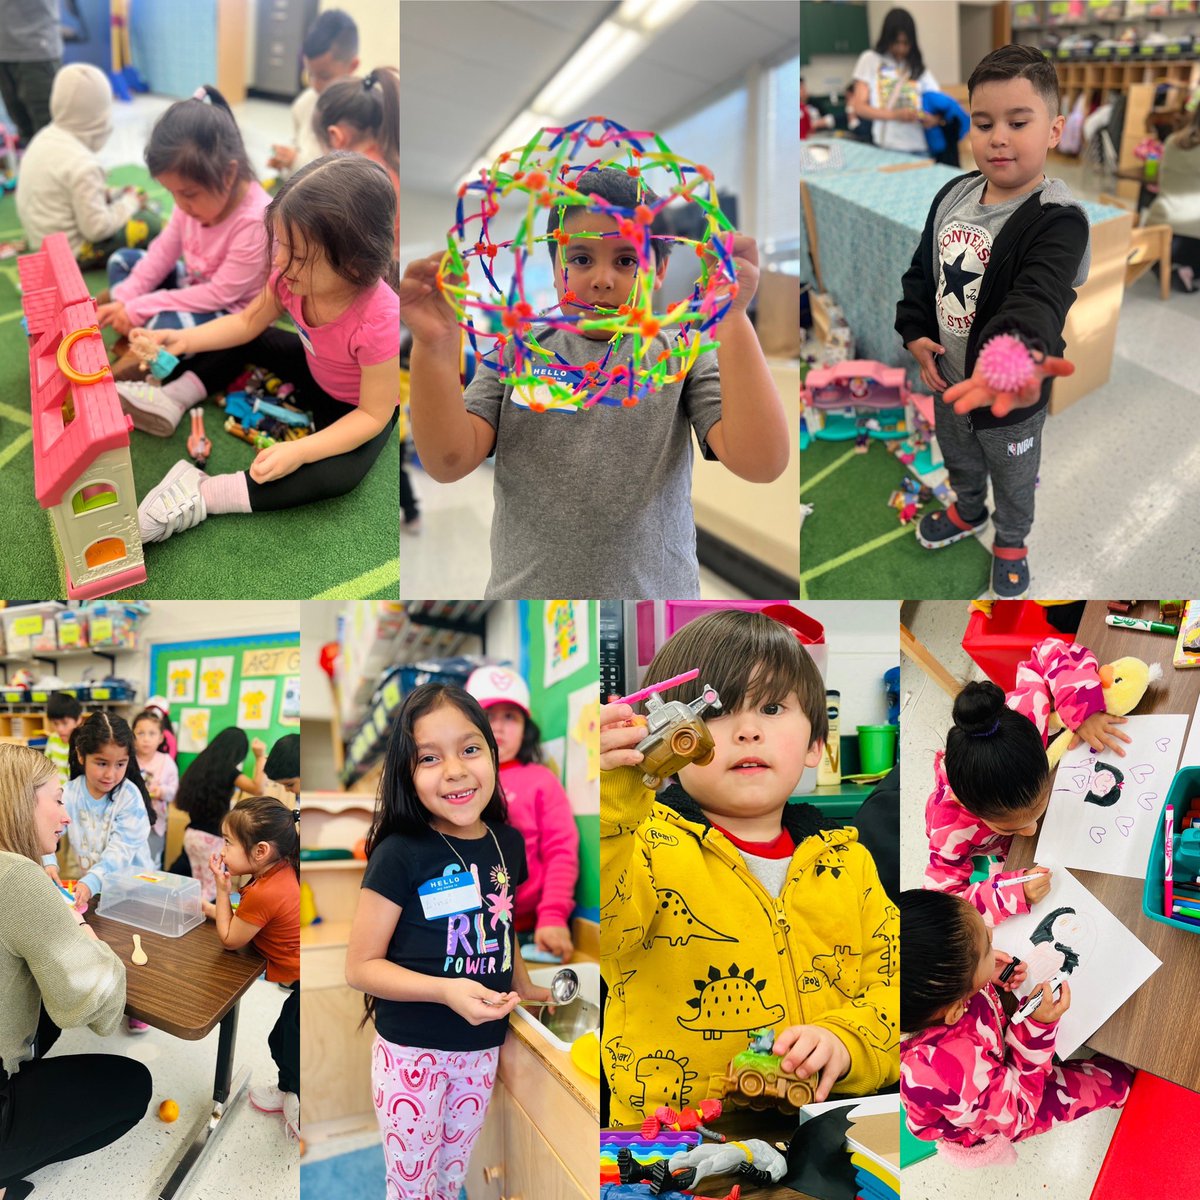 Another PEP session in the books! @MsKatBetancourt & I shared information about Supporting Learning at Home to parents while kids played!After dinner, families worked together to make a backpack craft of their own”Learning at Home” plan. @LCPS_FACE